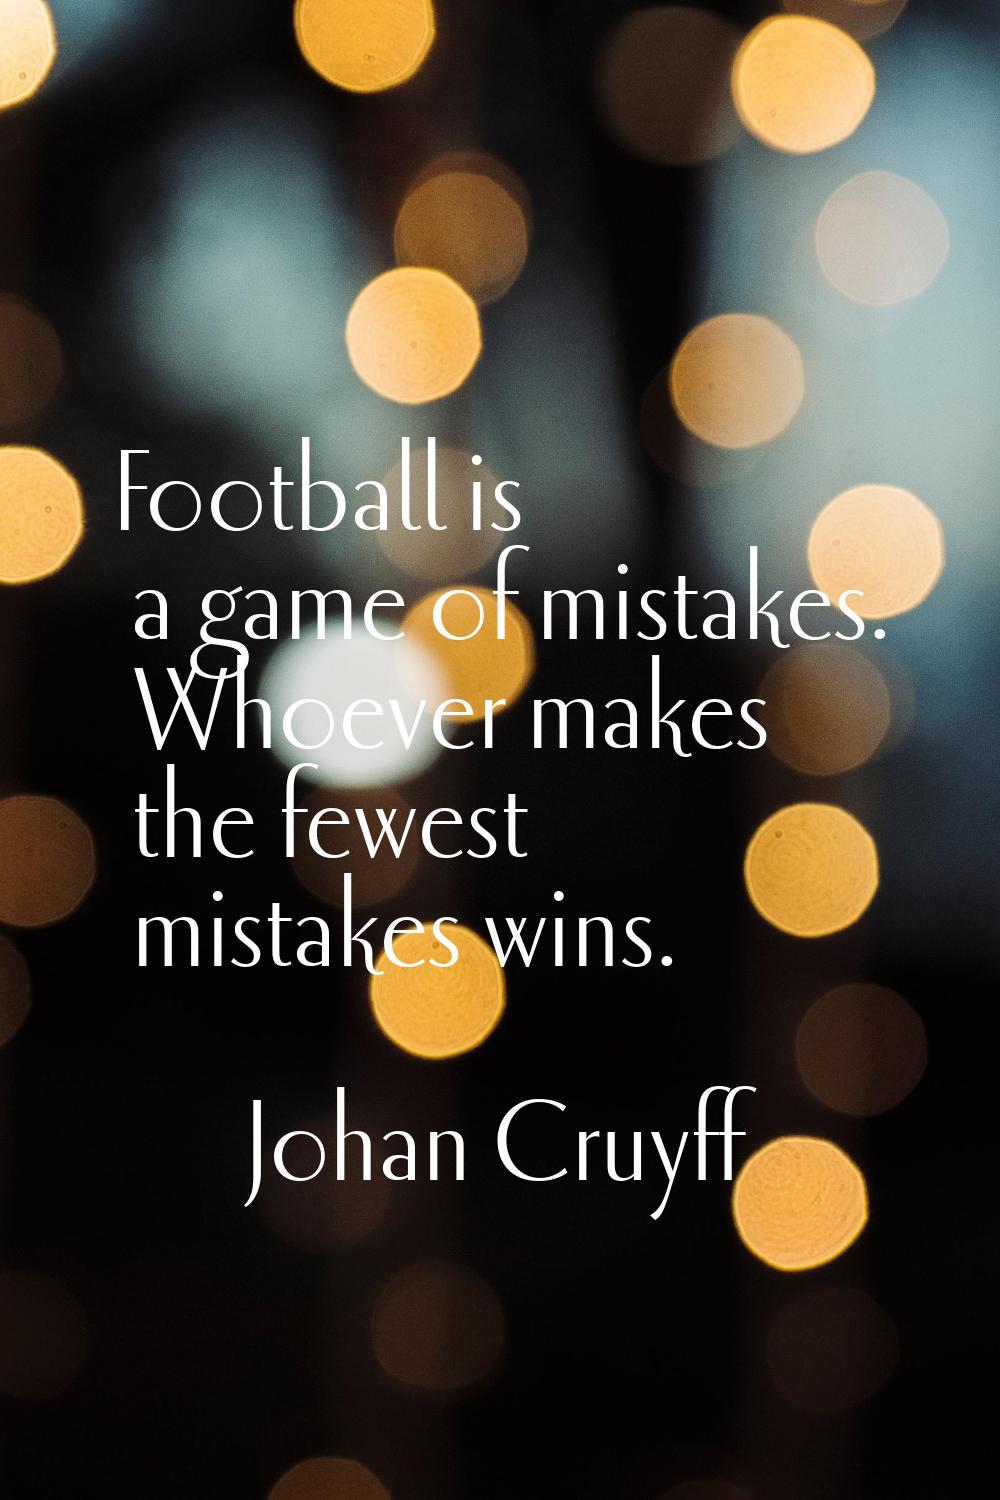 Football is a game of mistakes. Whoever makes the fewest mistakes wins.